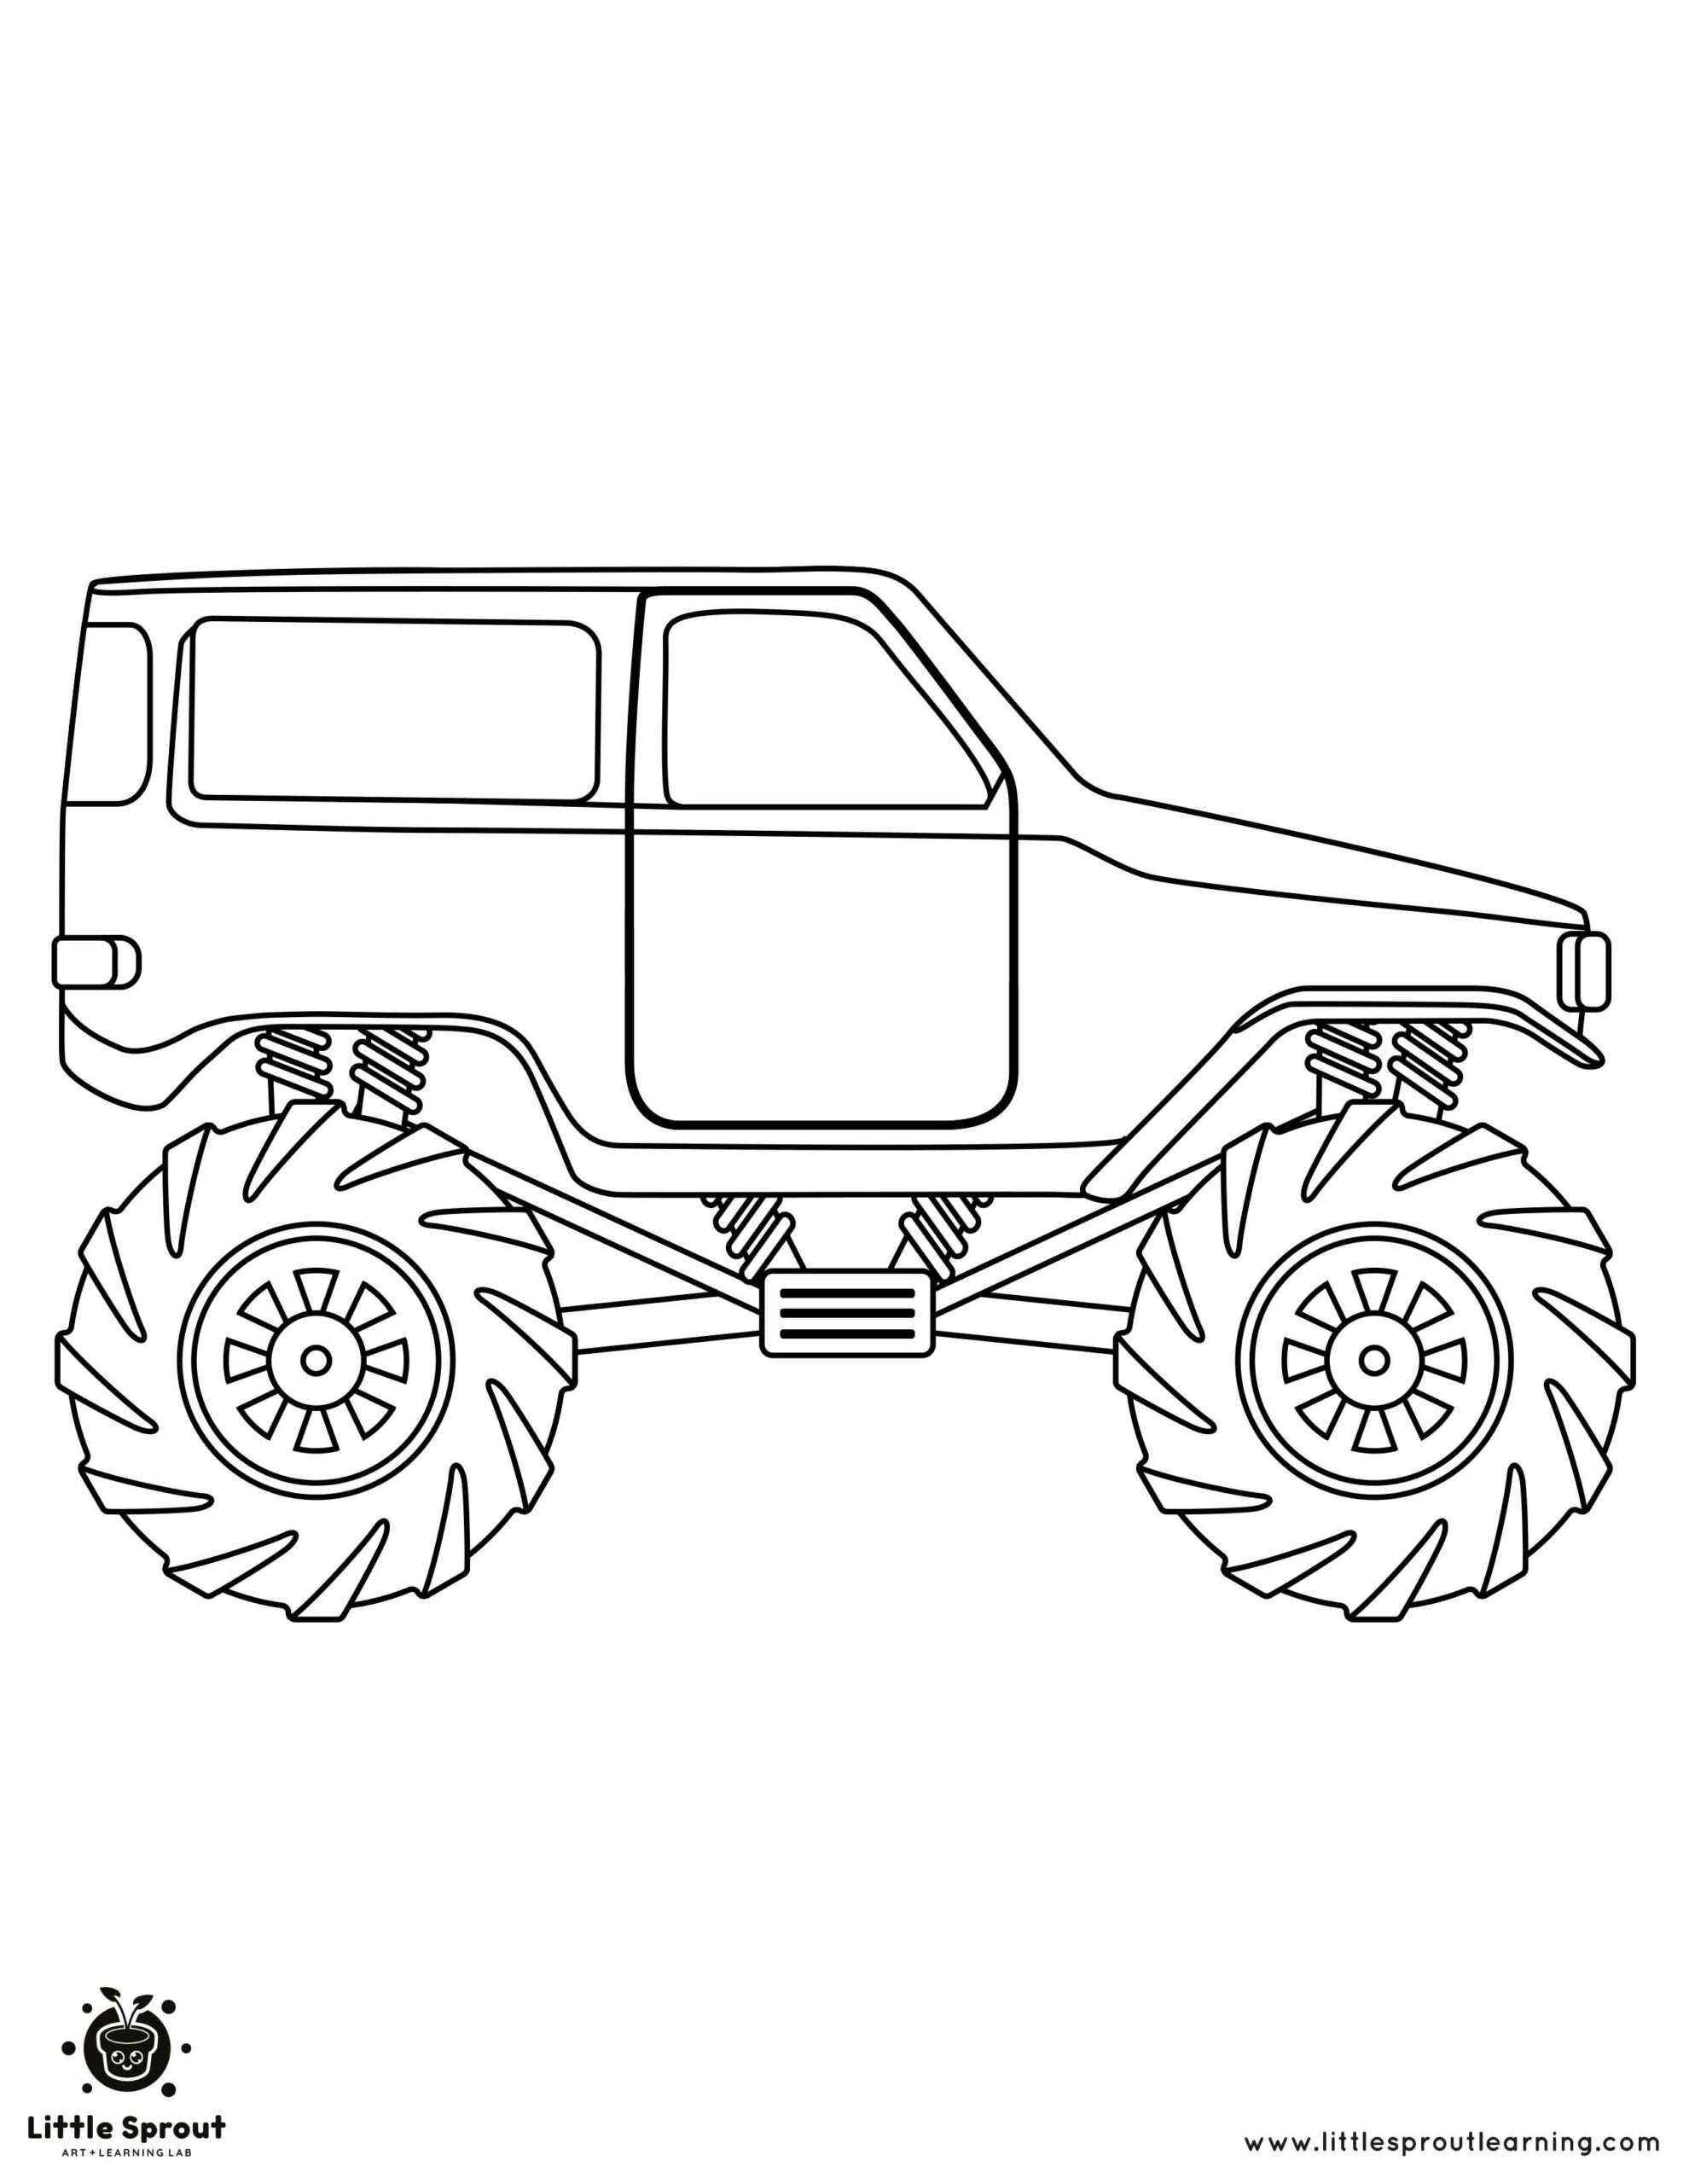 Best monster truck coloring pages top little sprout art